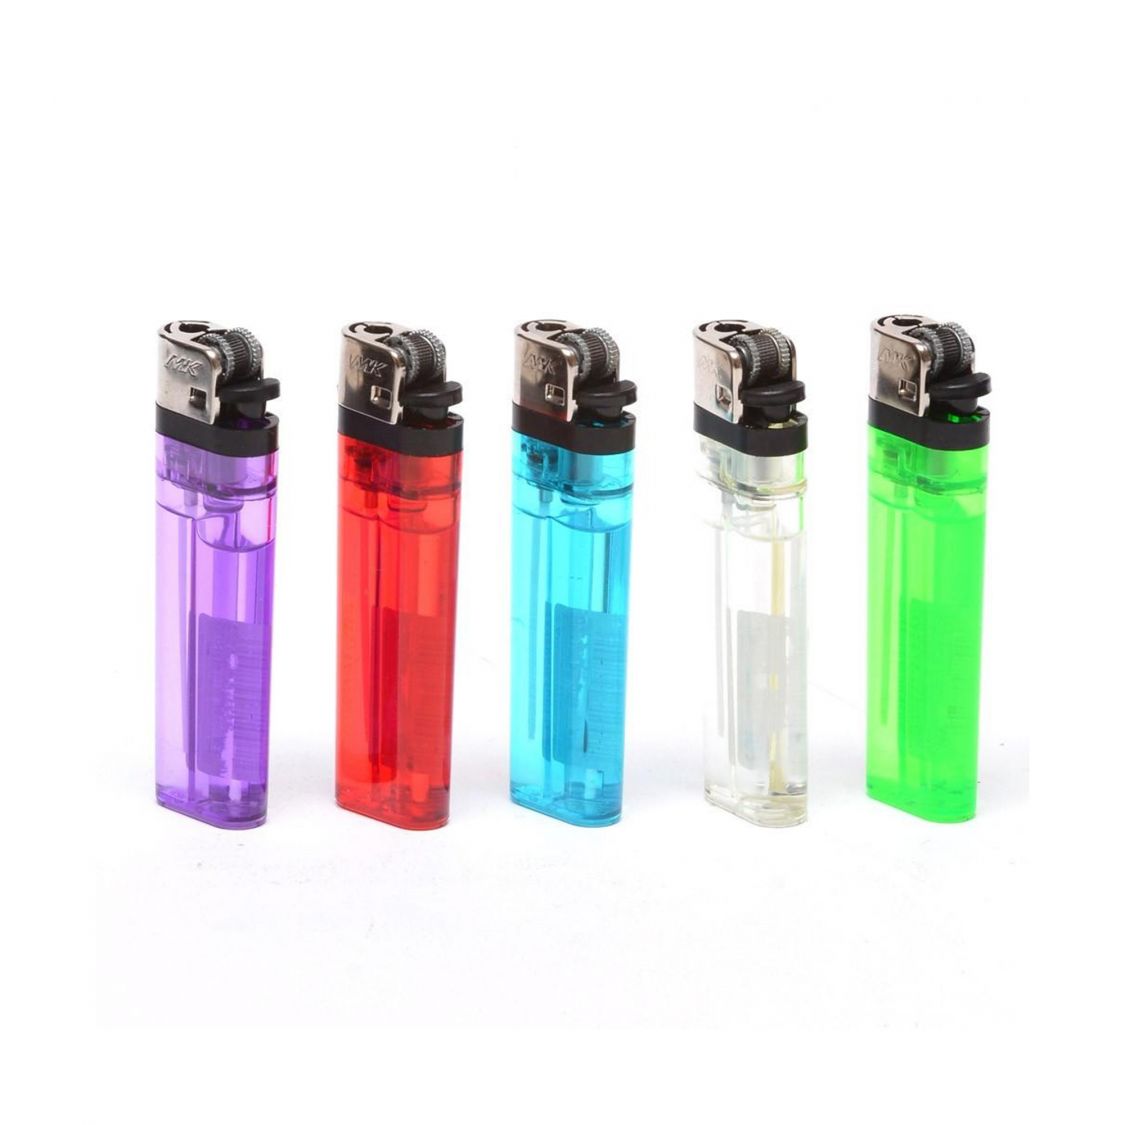 Wee Share Lighter (Color Varies) Accessories Gear